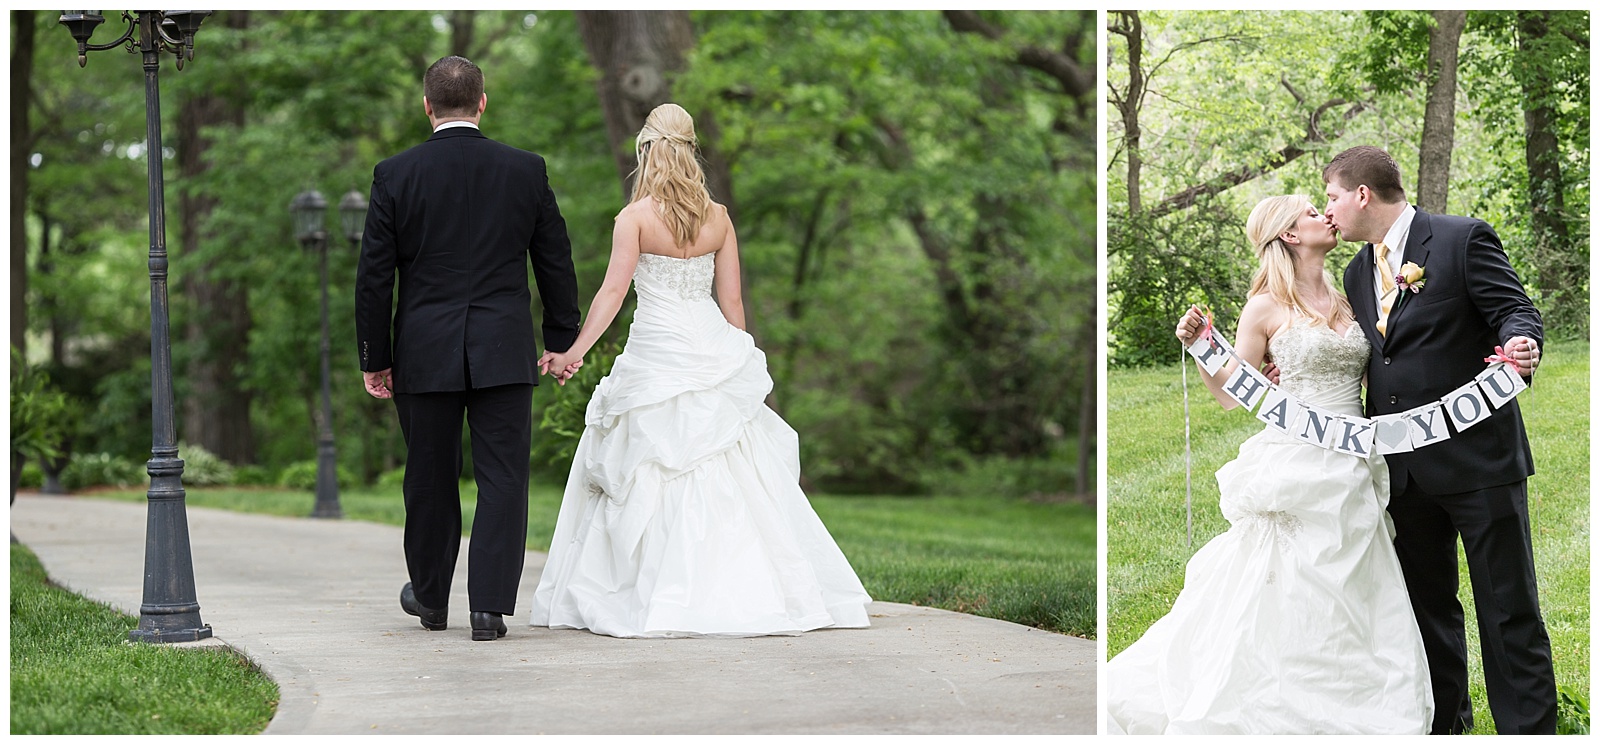 Wedding photography at The Elms in Excelsior Springs, Missouri.